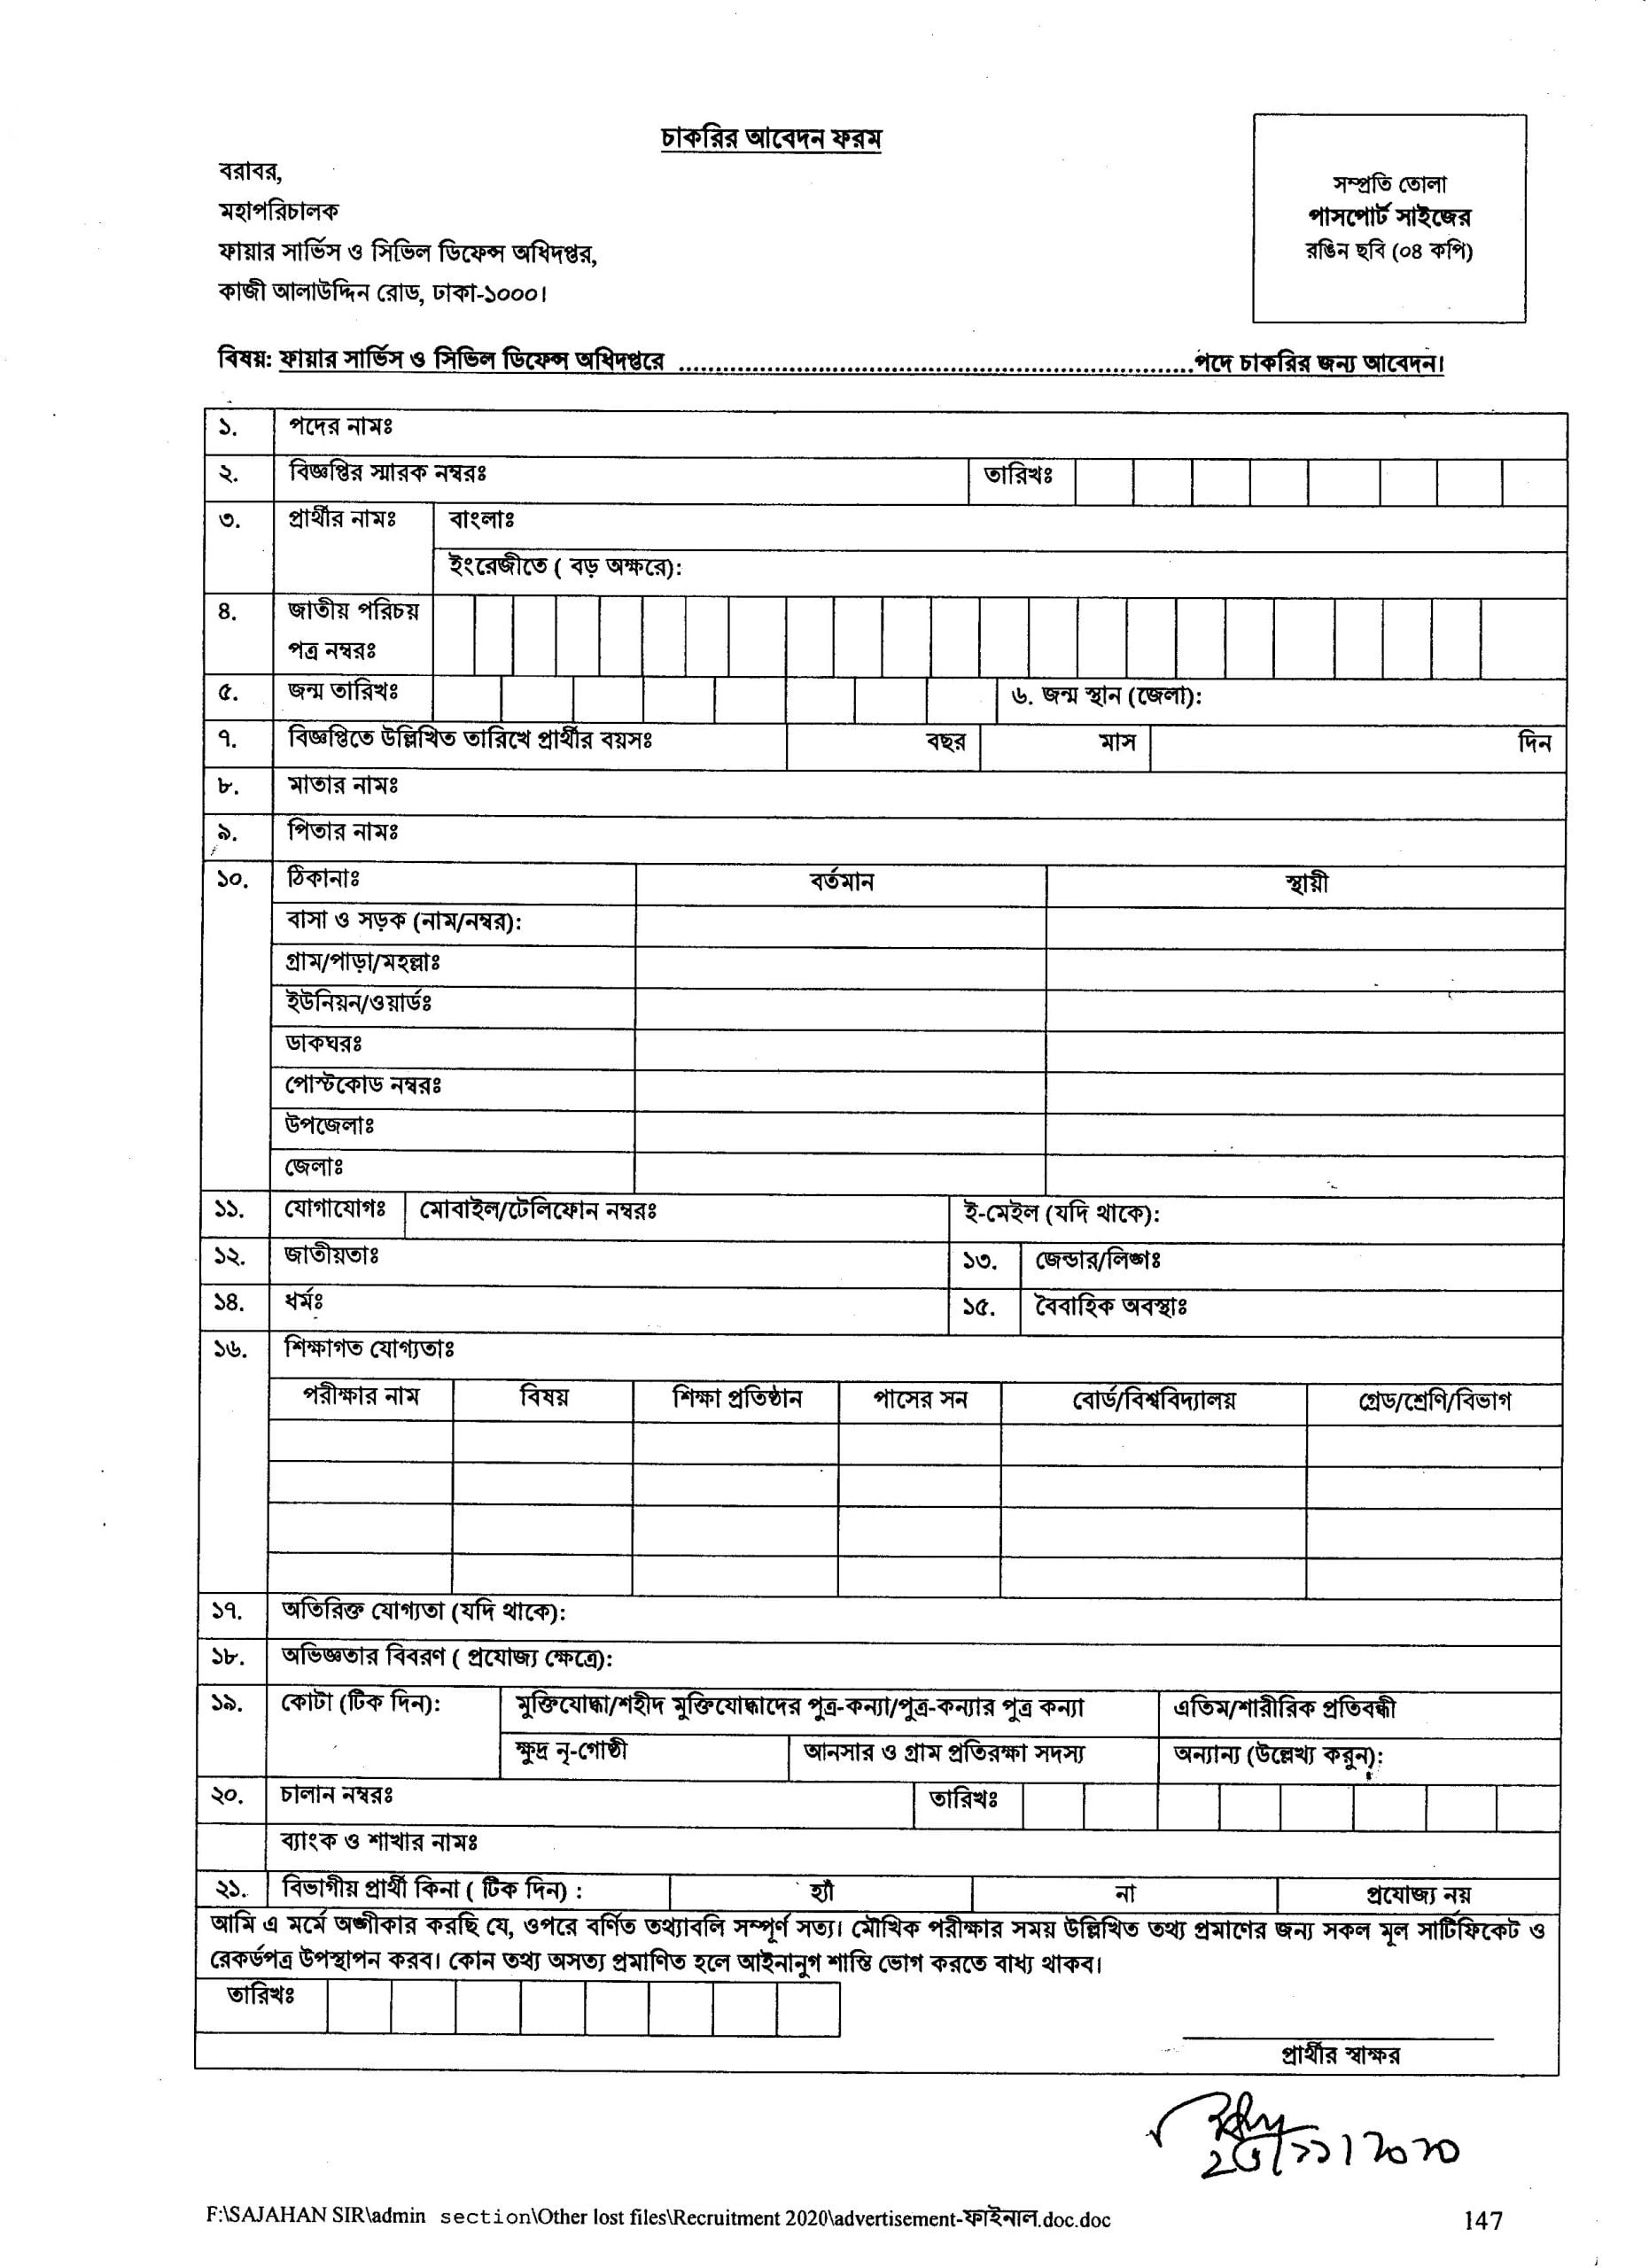 fire service job application form scaled